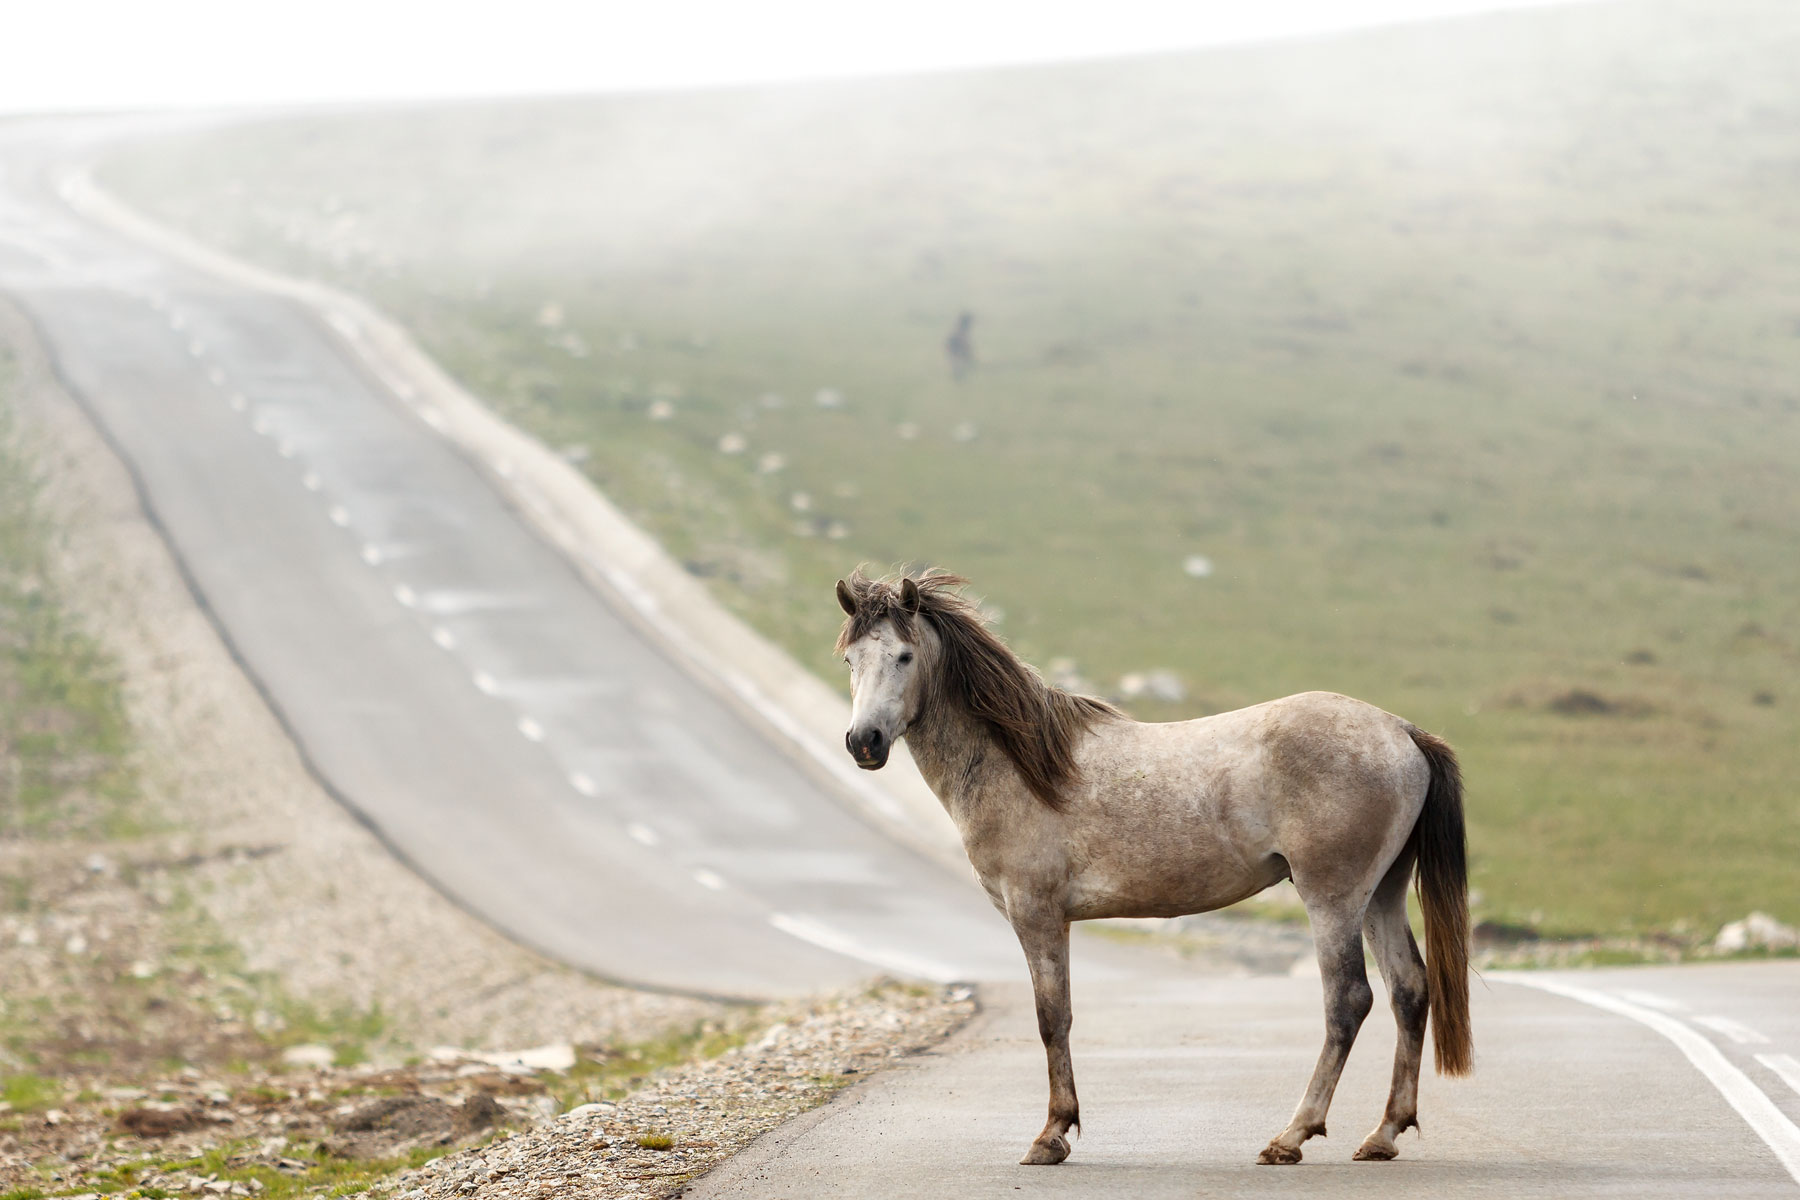 Horse crossing the road